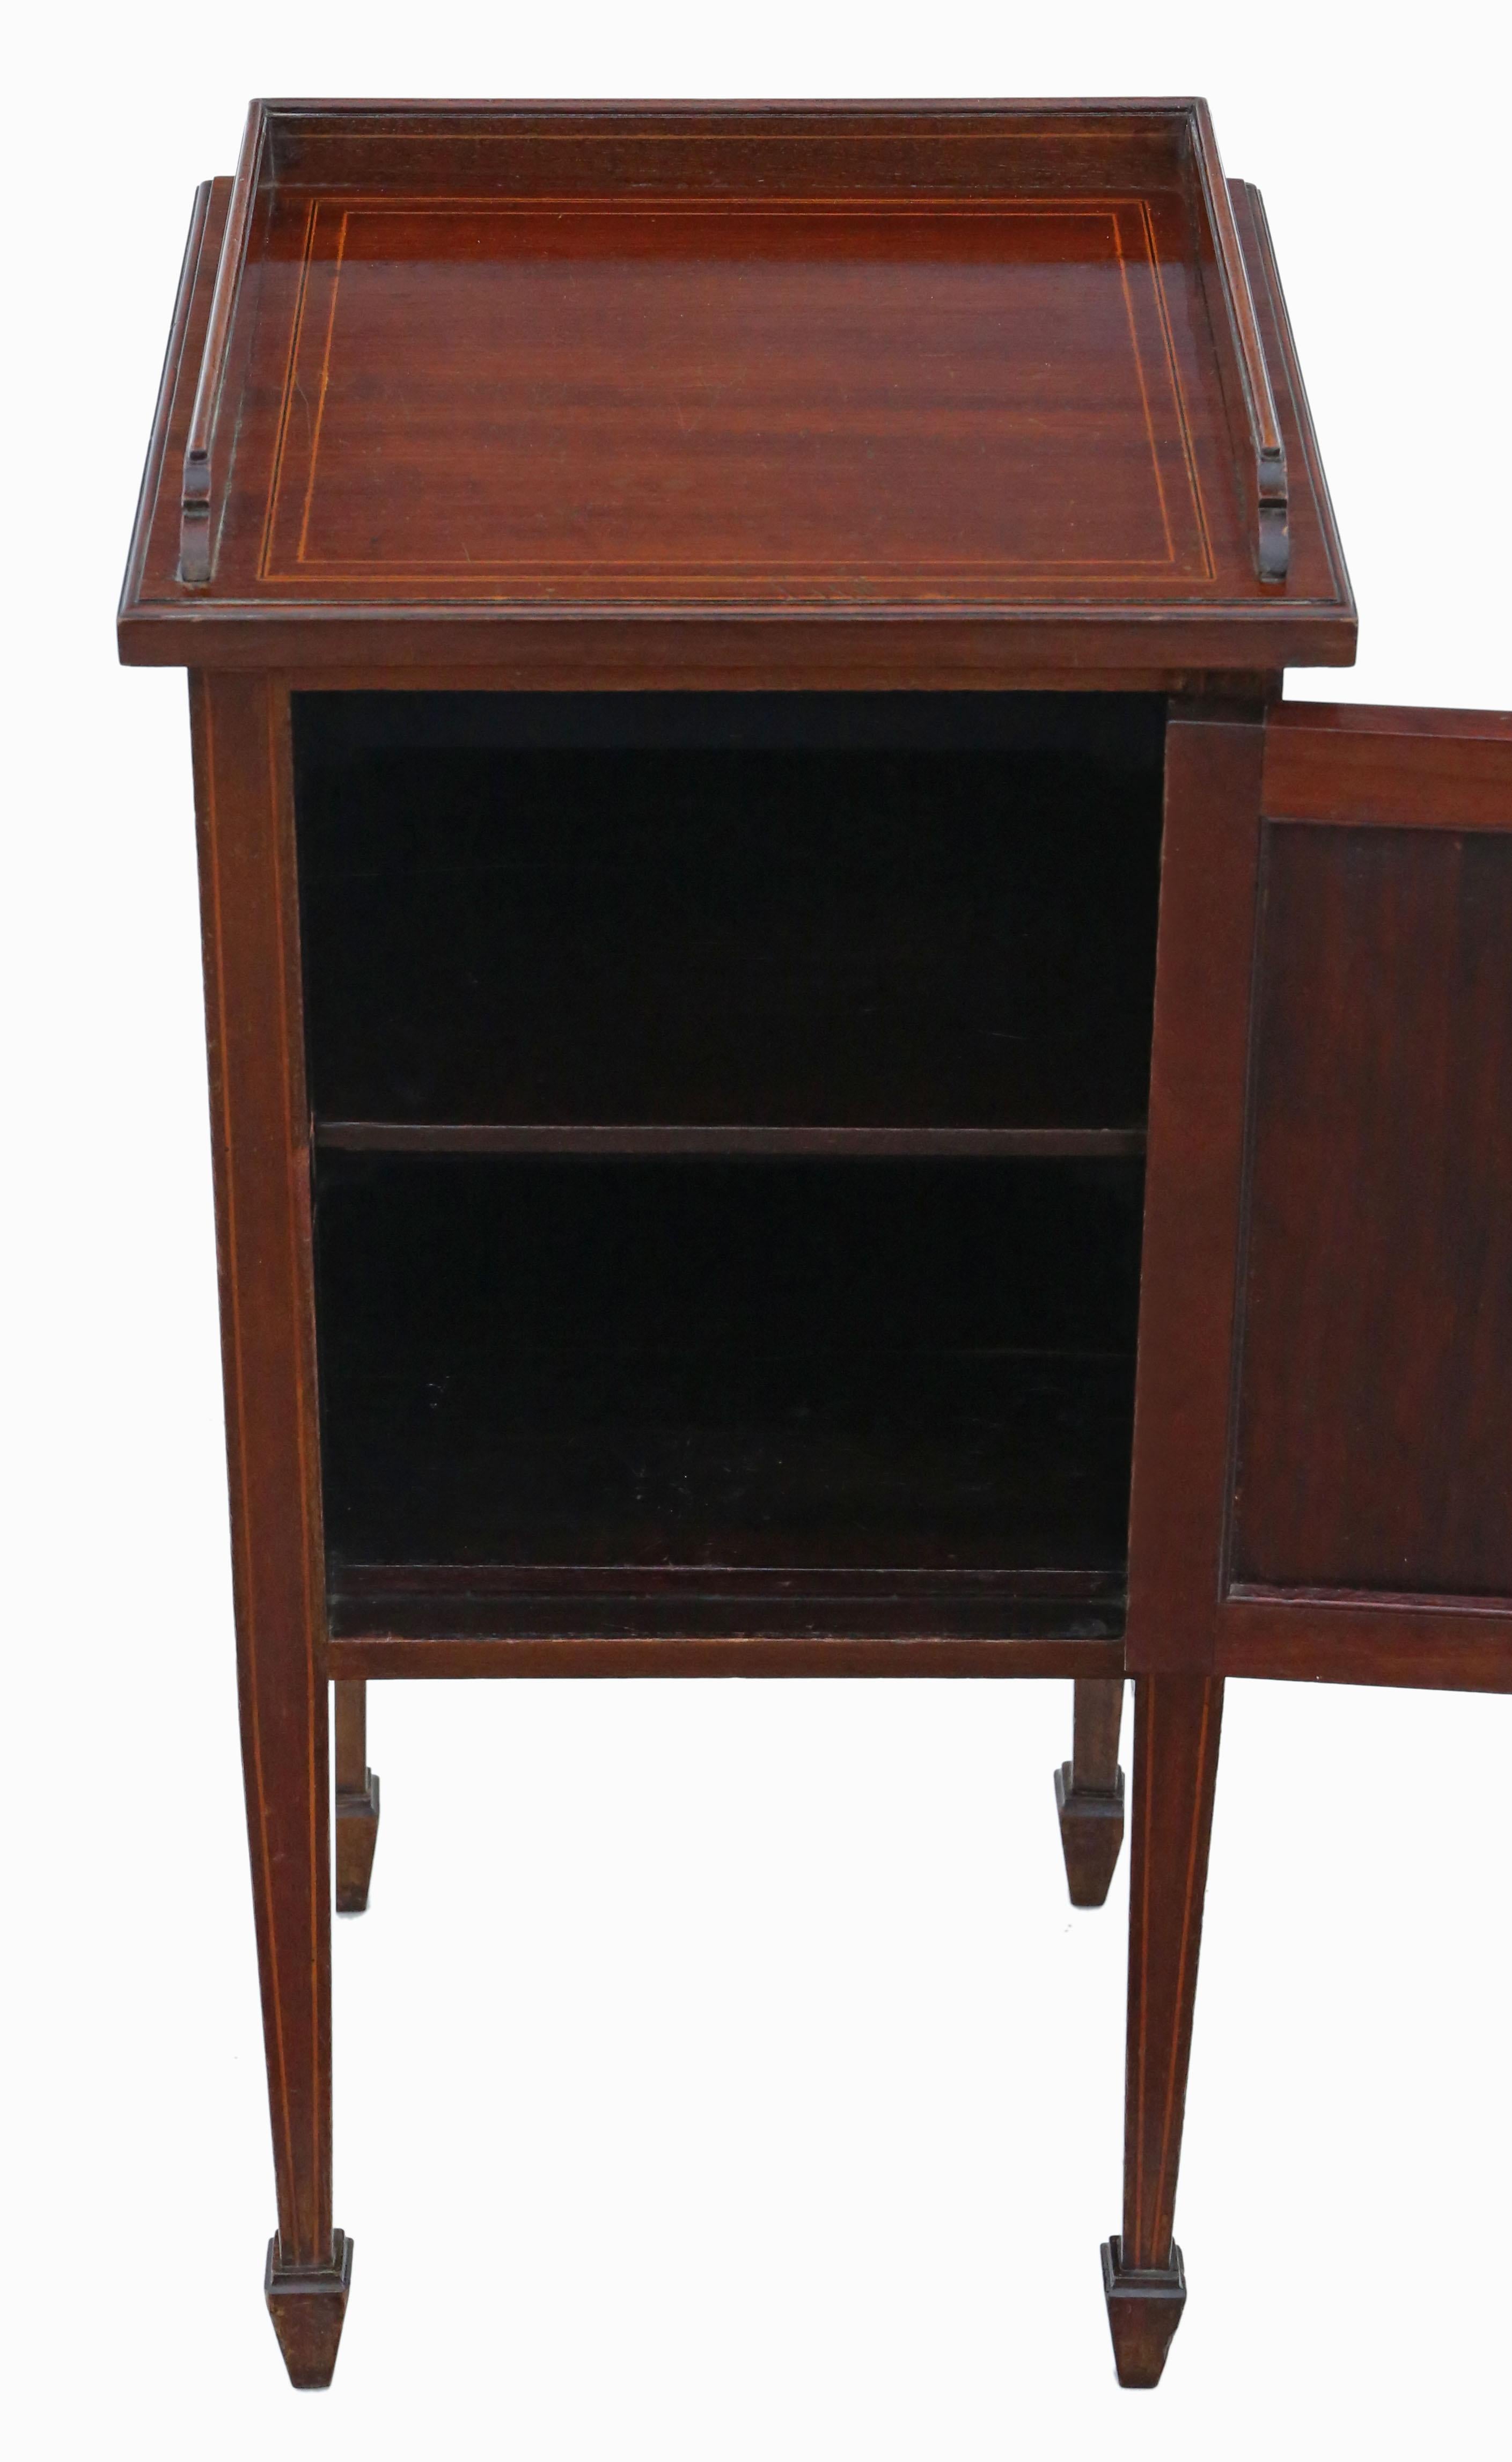 Antique fine quality Edwardian Georgian revival tray top inlaid mahogany bedside table cupboard C1905.

A fantastic piece with quality and style.

No loose joints or woodworm and a working catch.

Would look great in the right